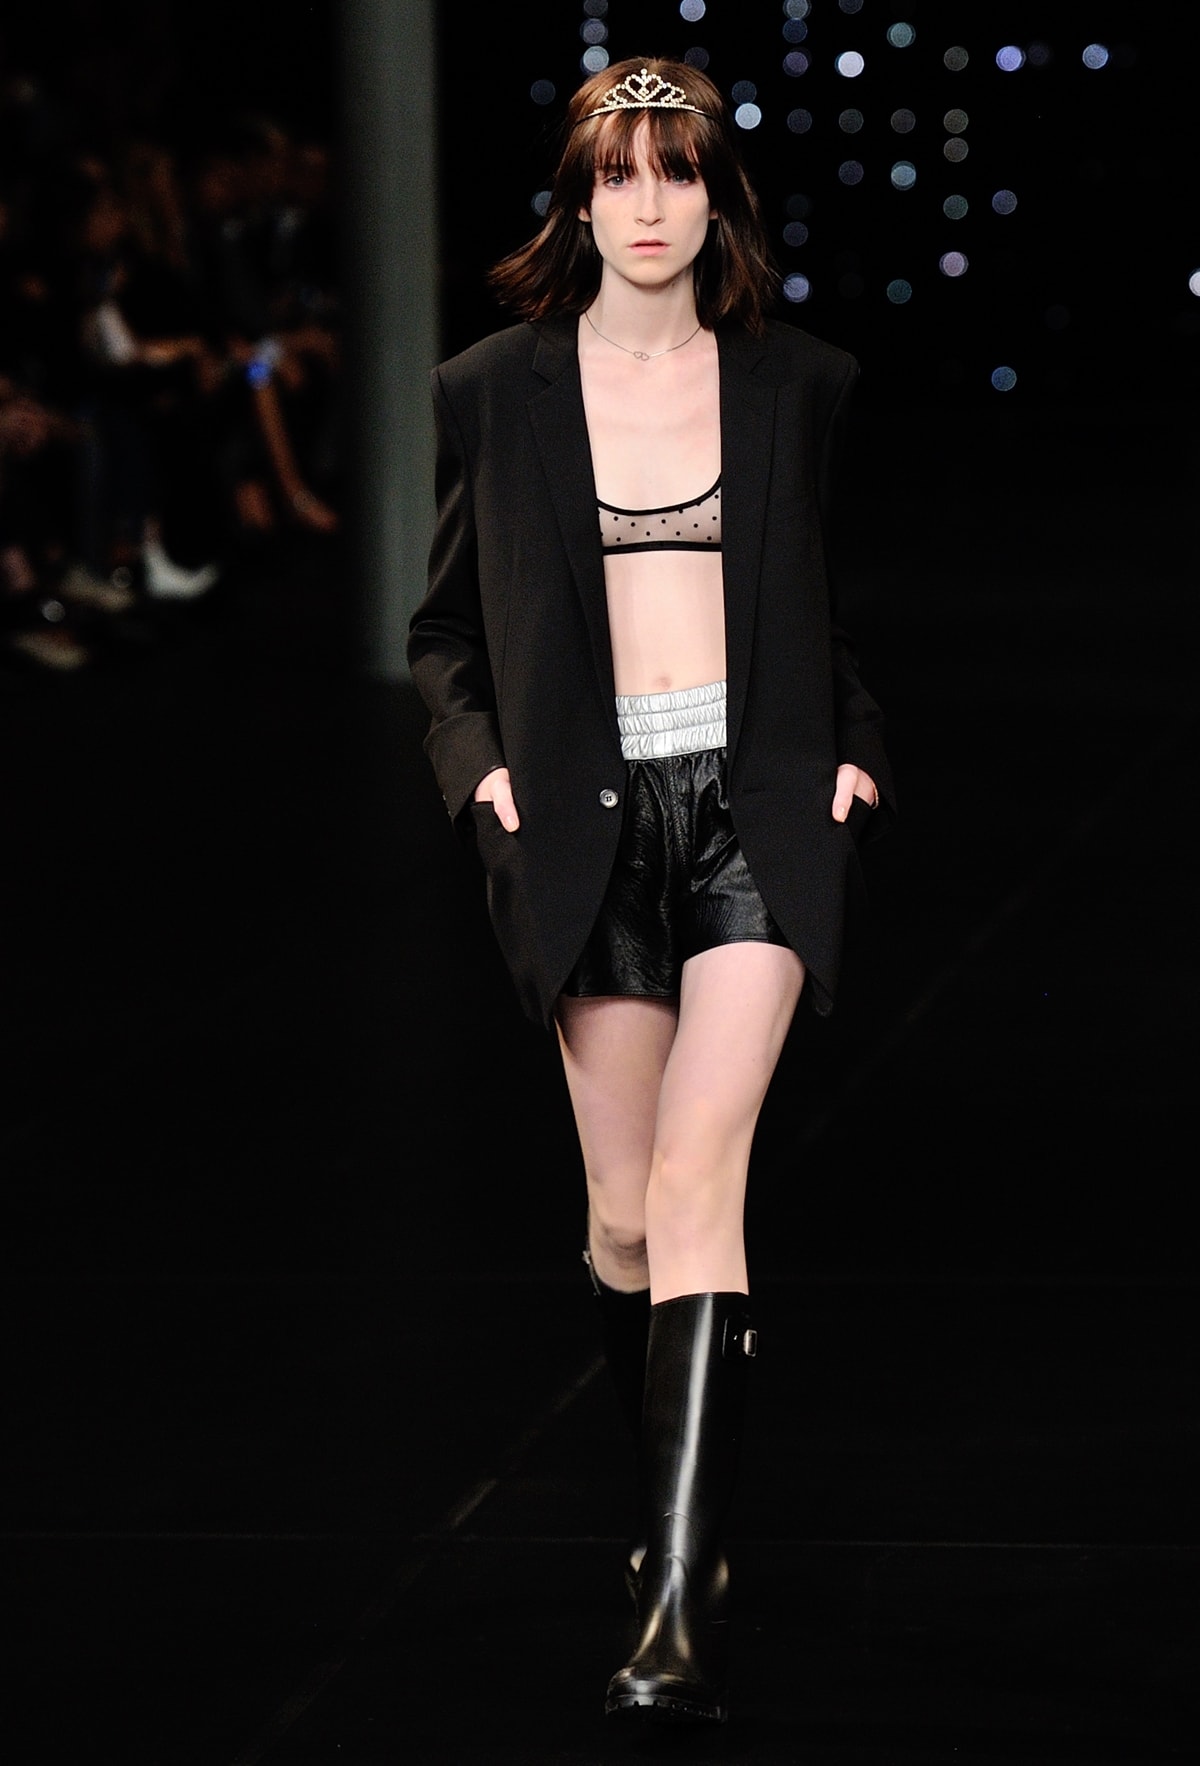 A model walks the runway with a tiara during the Saint Laurent Ready to Wear show